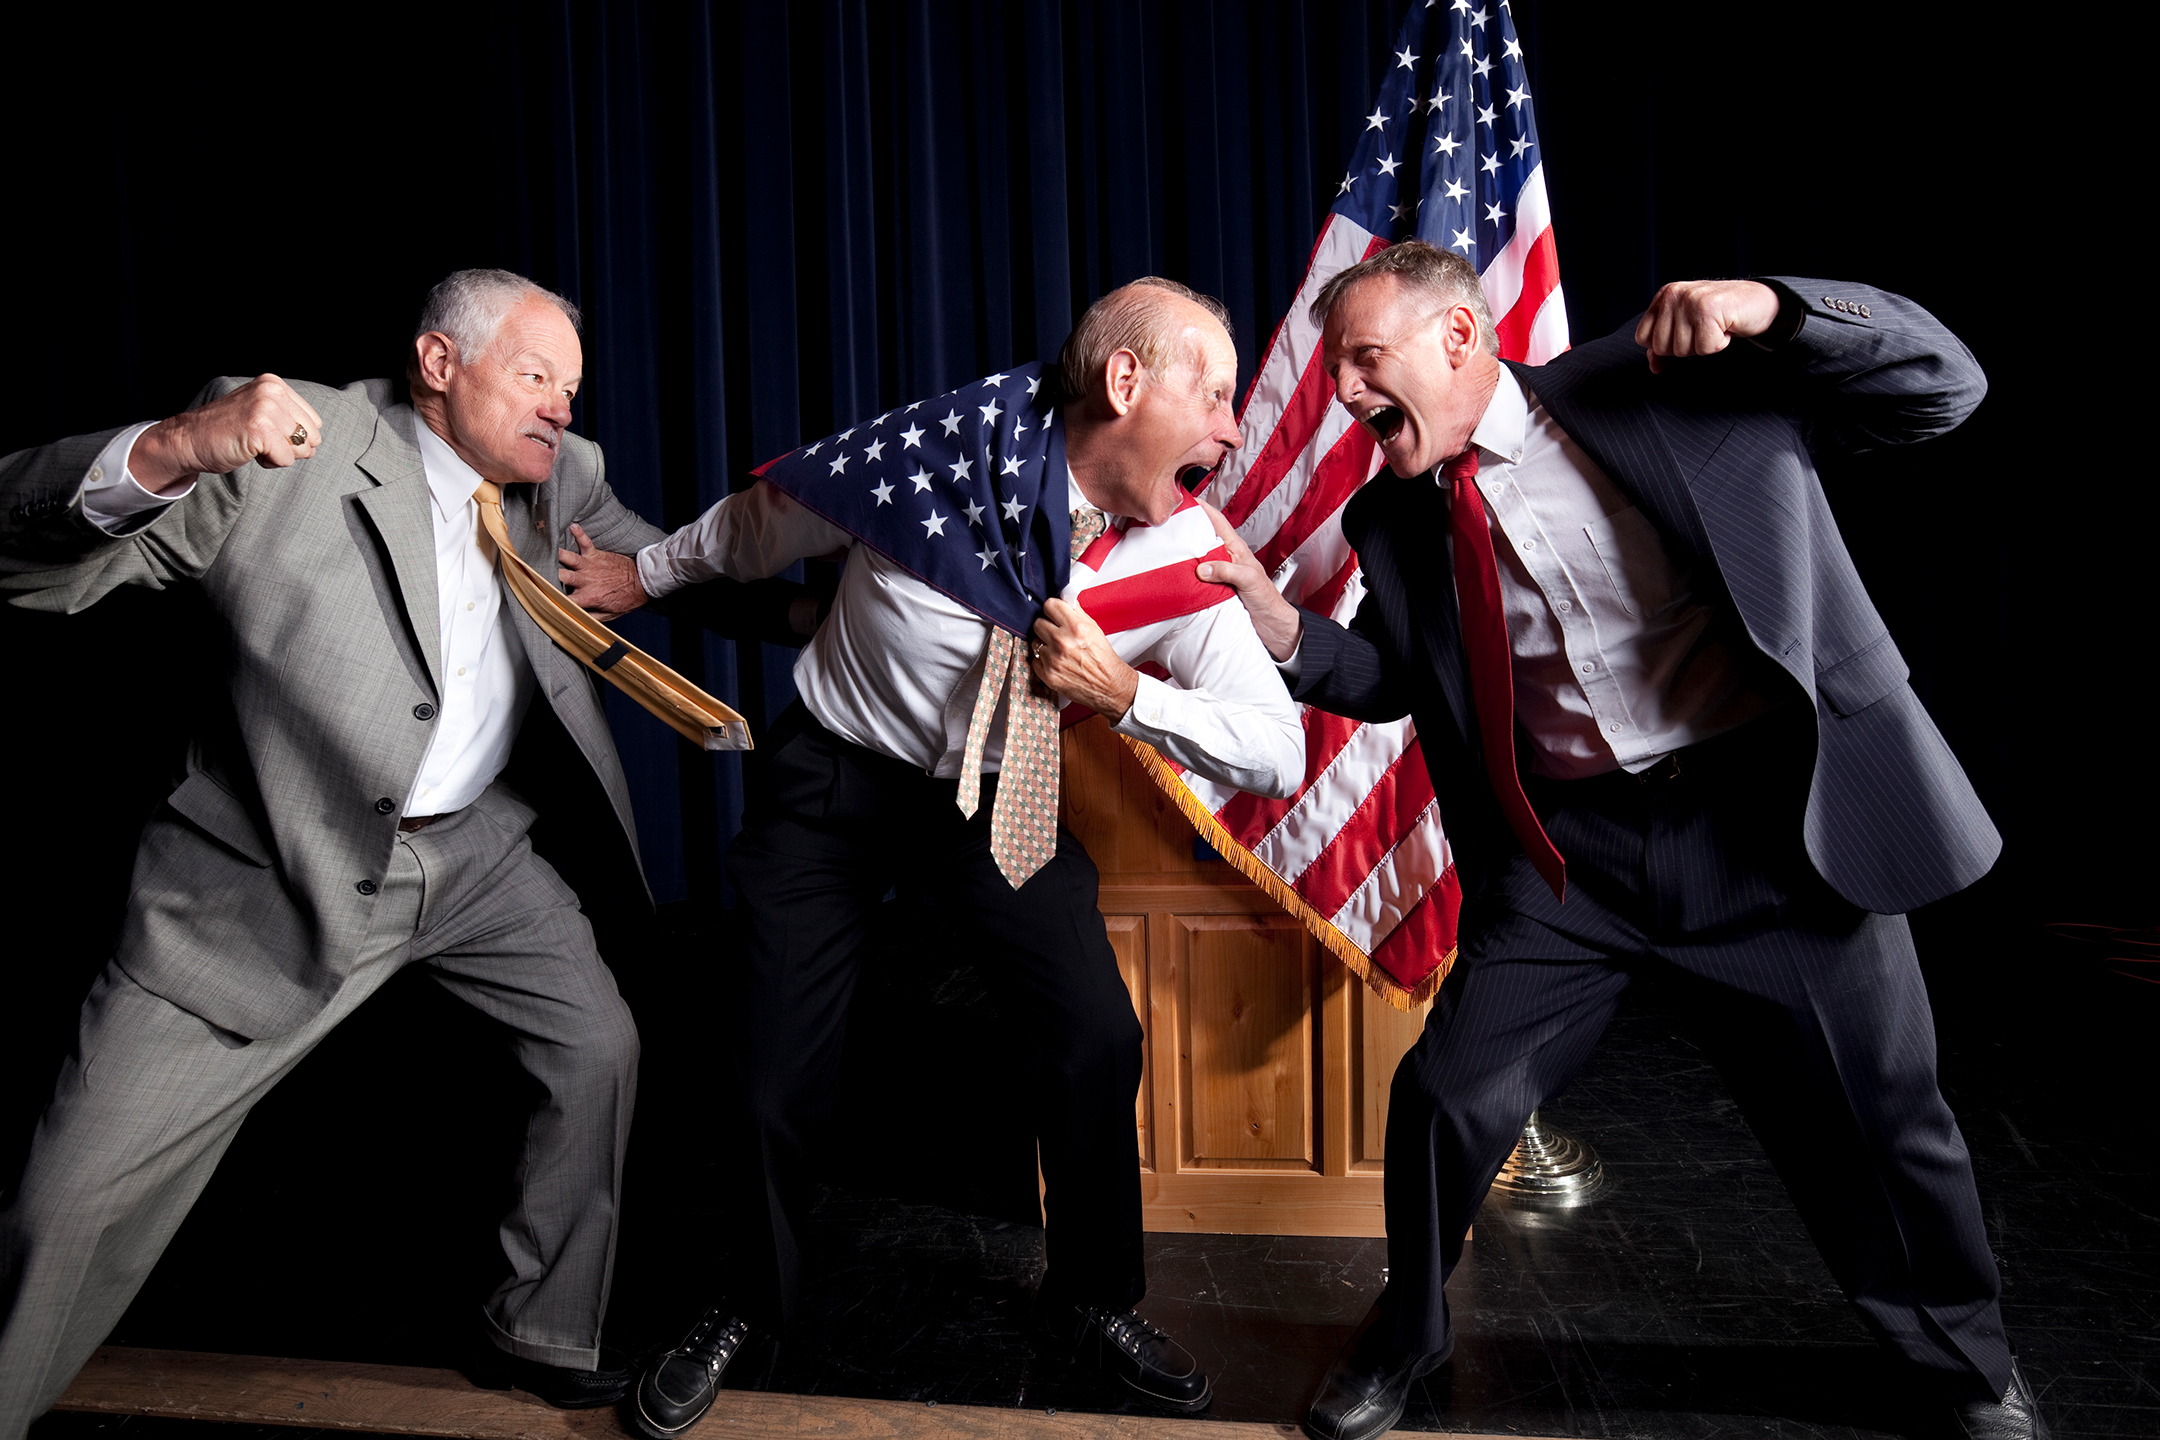 Three old white men, two on the left, one on the right, about to throw punches at each other while on a stage. The man in the middle is wrapped in an American flag.